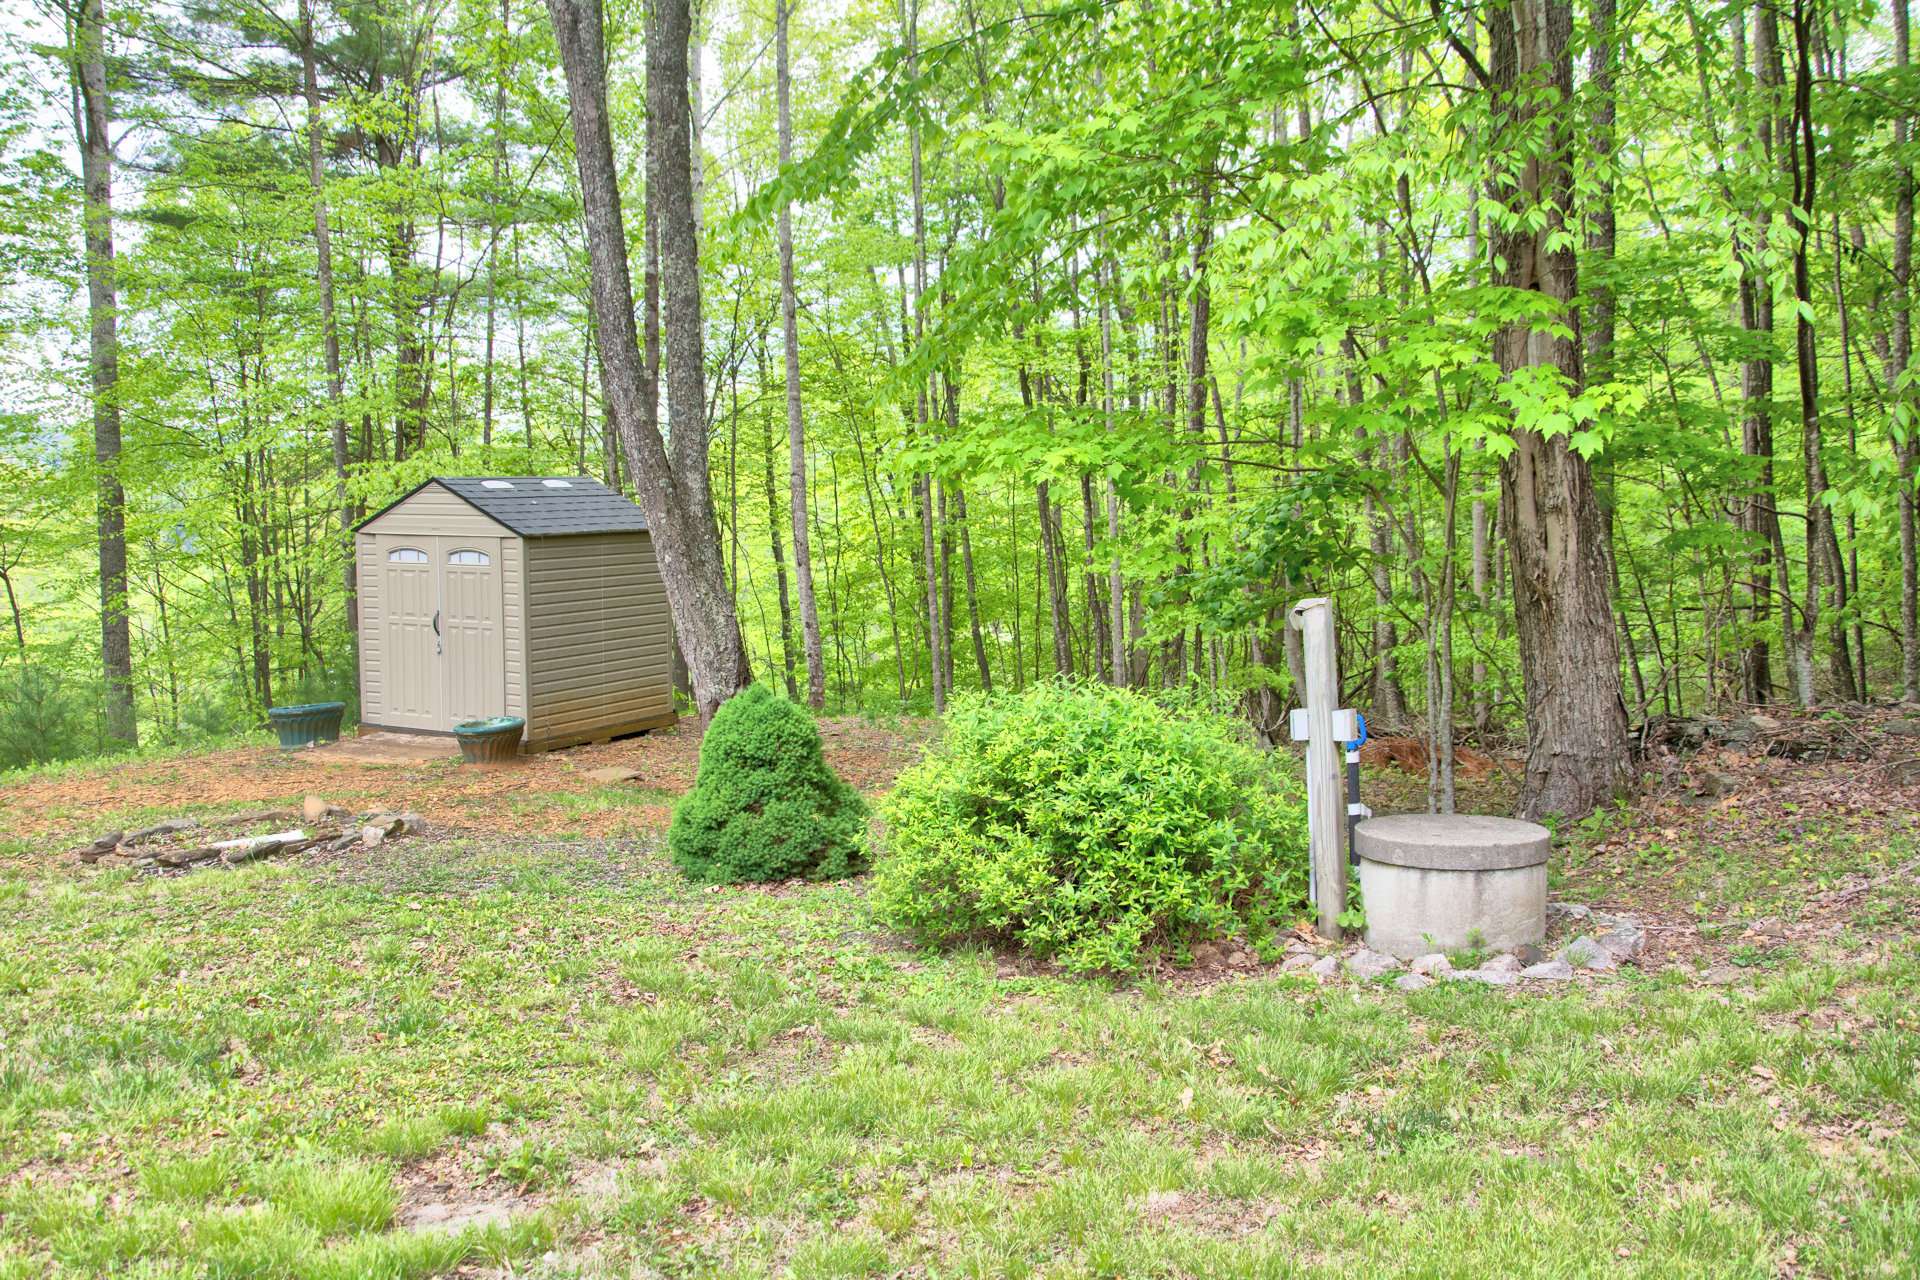 The back yard features a storage building and space for outdoor firepit area.  The location is convenient to the New River, Historic Lansing, shopping in West Jefferson, and hiking at nearby Grayson Highlands Park.